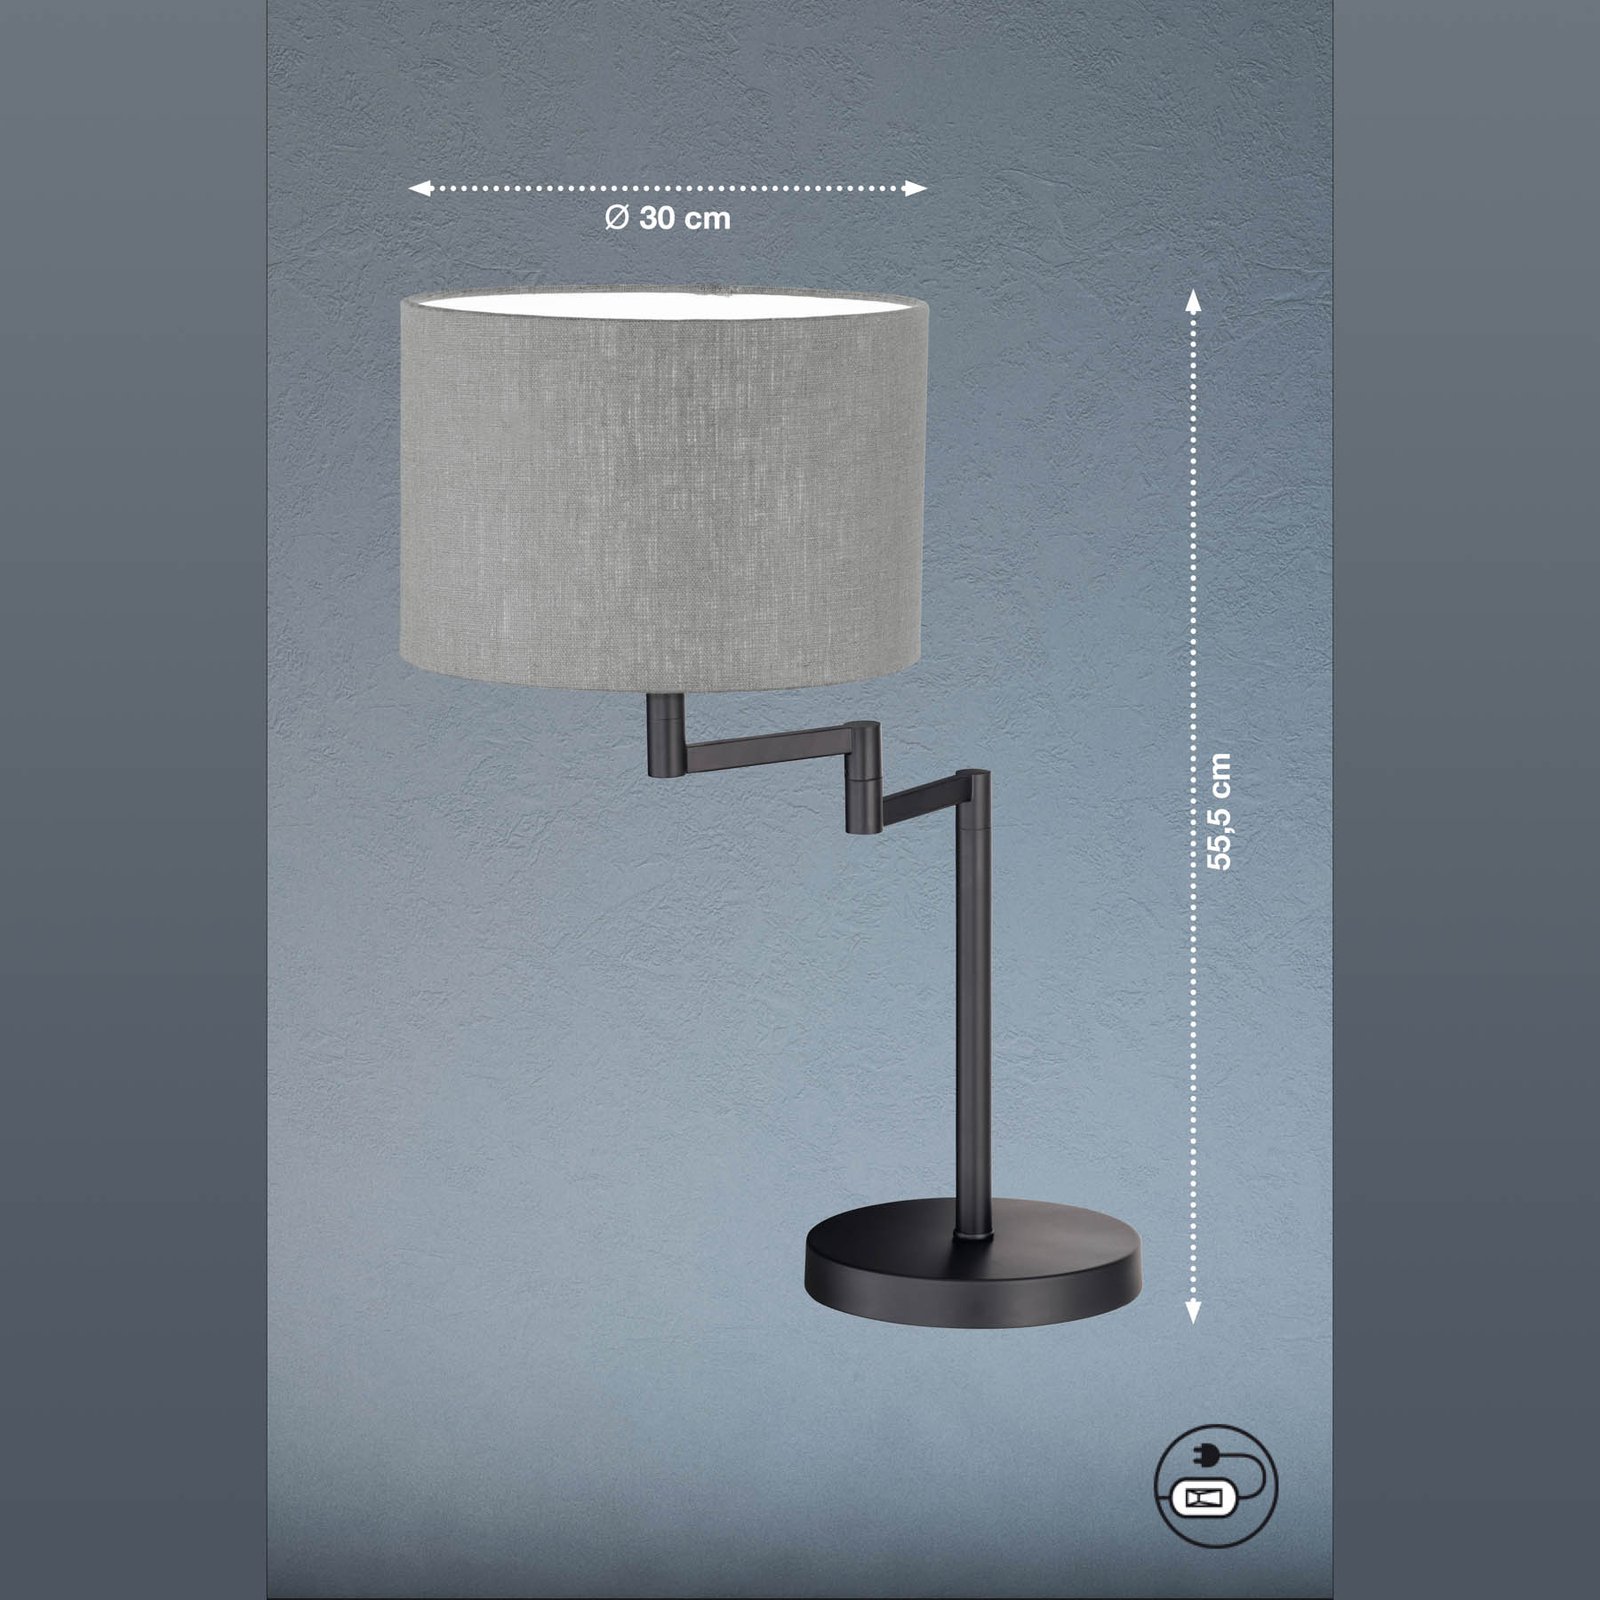 Rota table lamp with grey linen lampshade